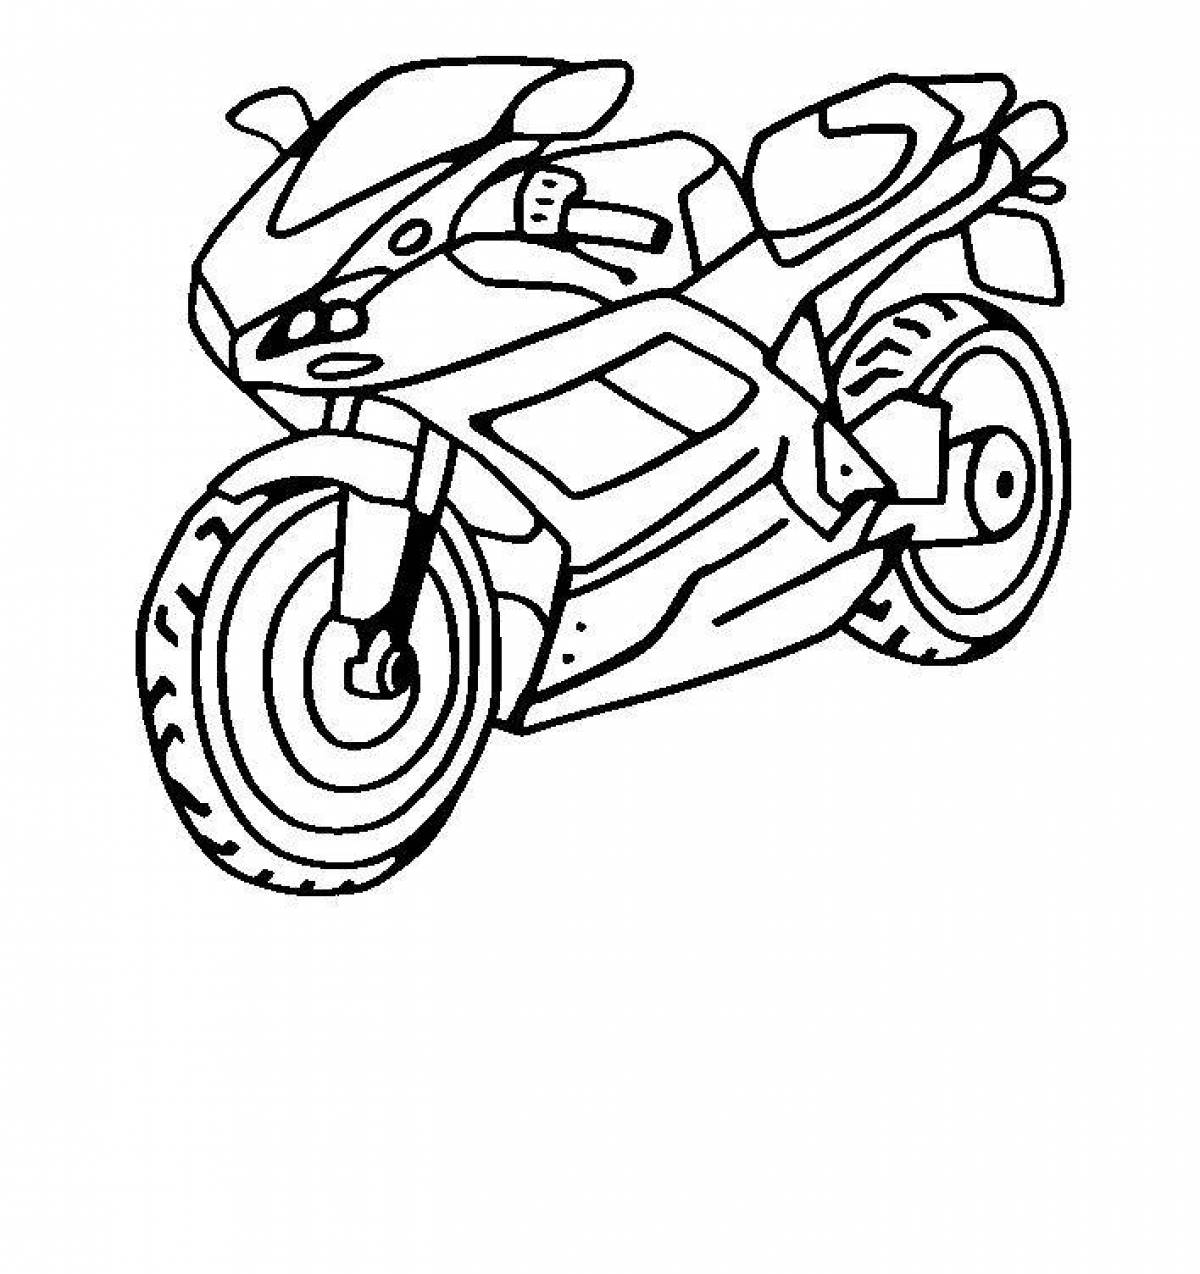 Adorable motorcycle coloring page for 4-5 year olds